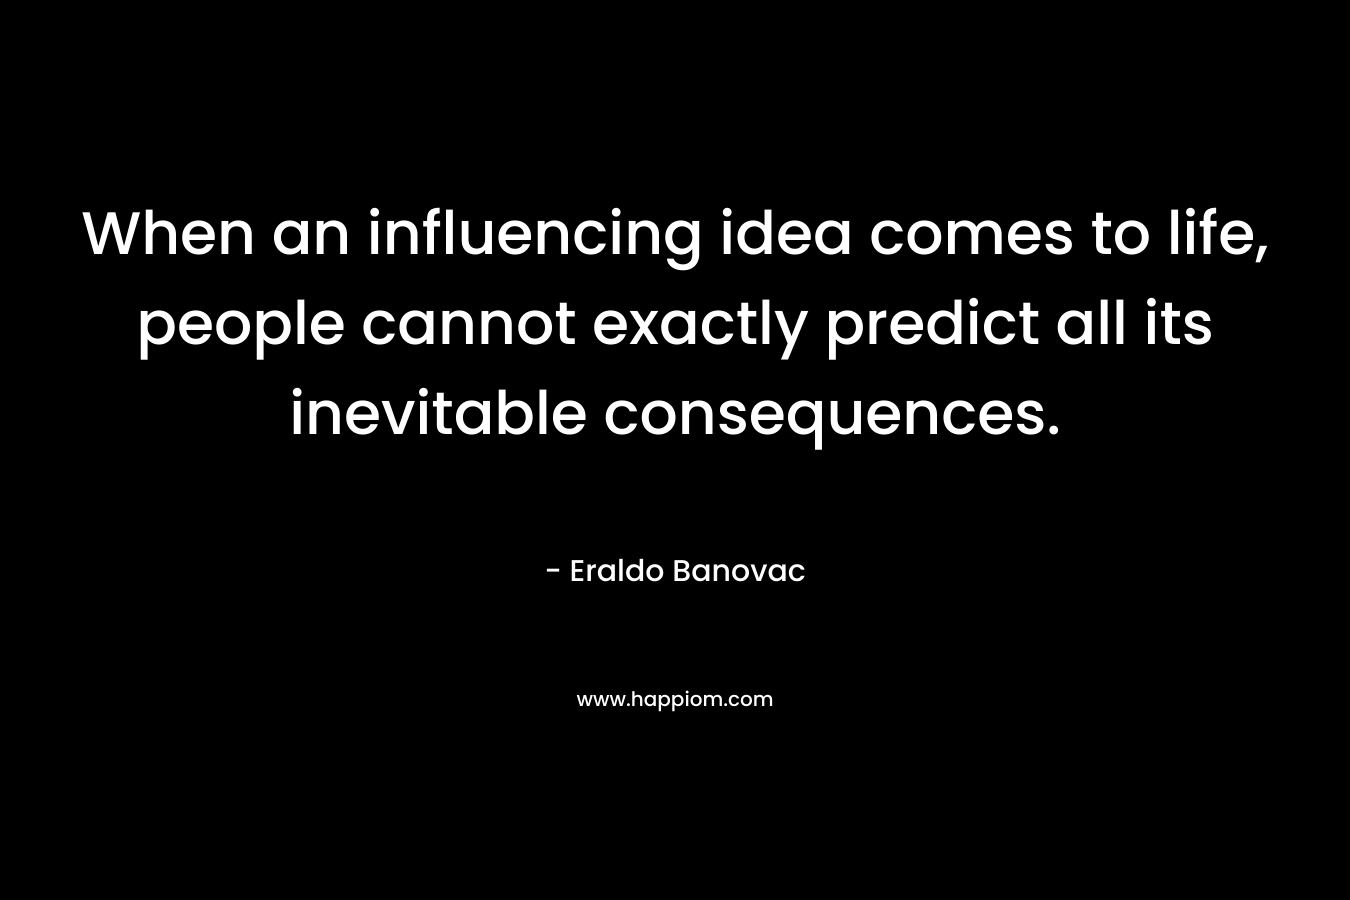 When an influencing idea comes to life, people cannot exactly predict all its inevitable consequences. – Eraldo Banovac